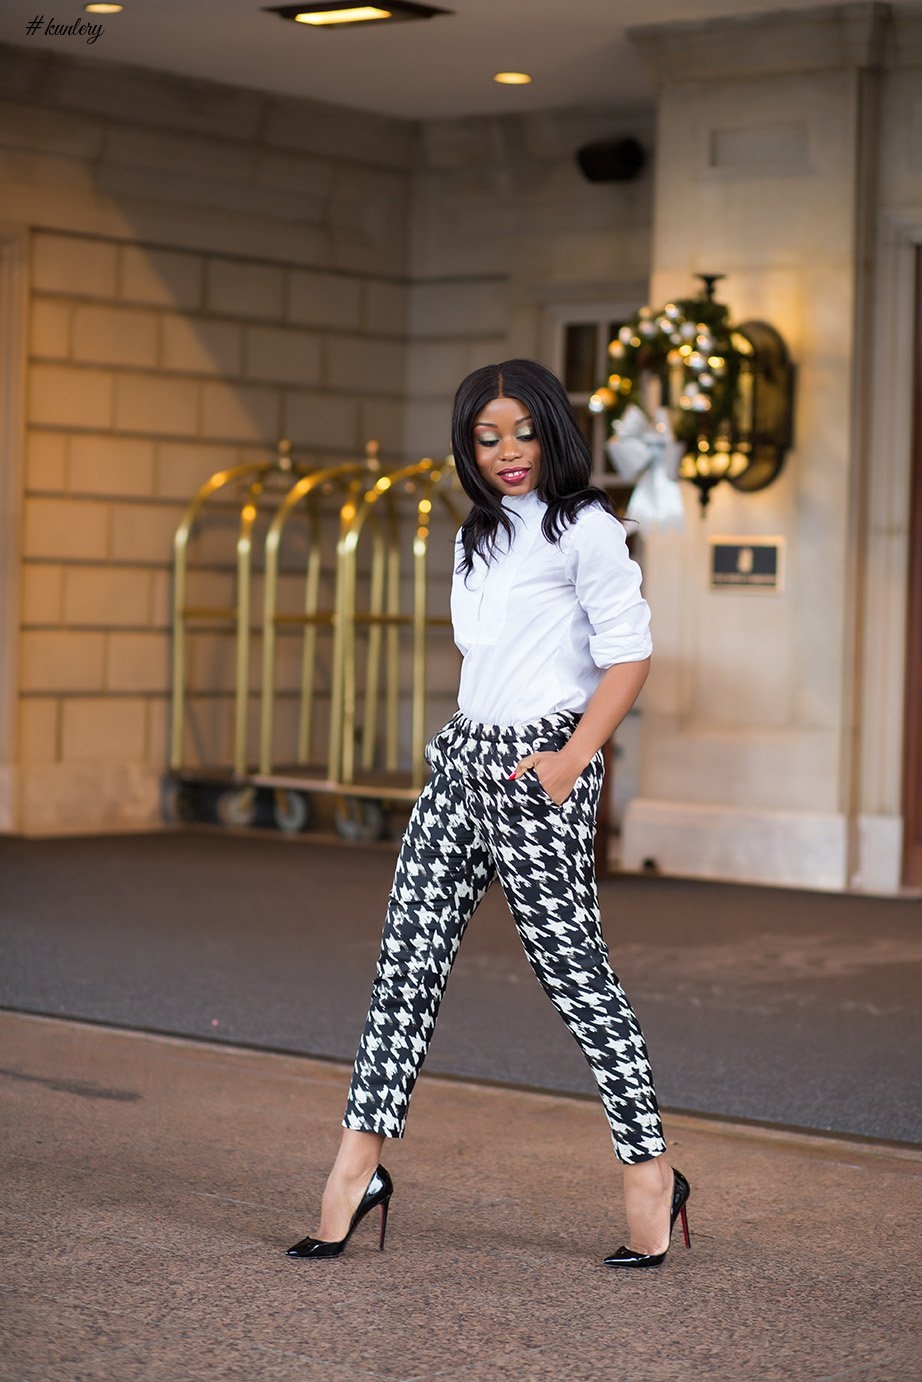 TIRED OF BORING WORK CLOTHES? TRY THESE LOOKS